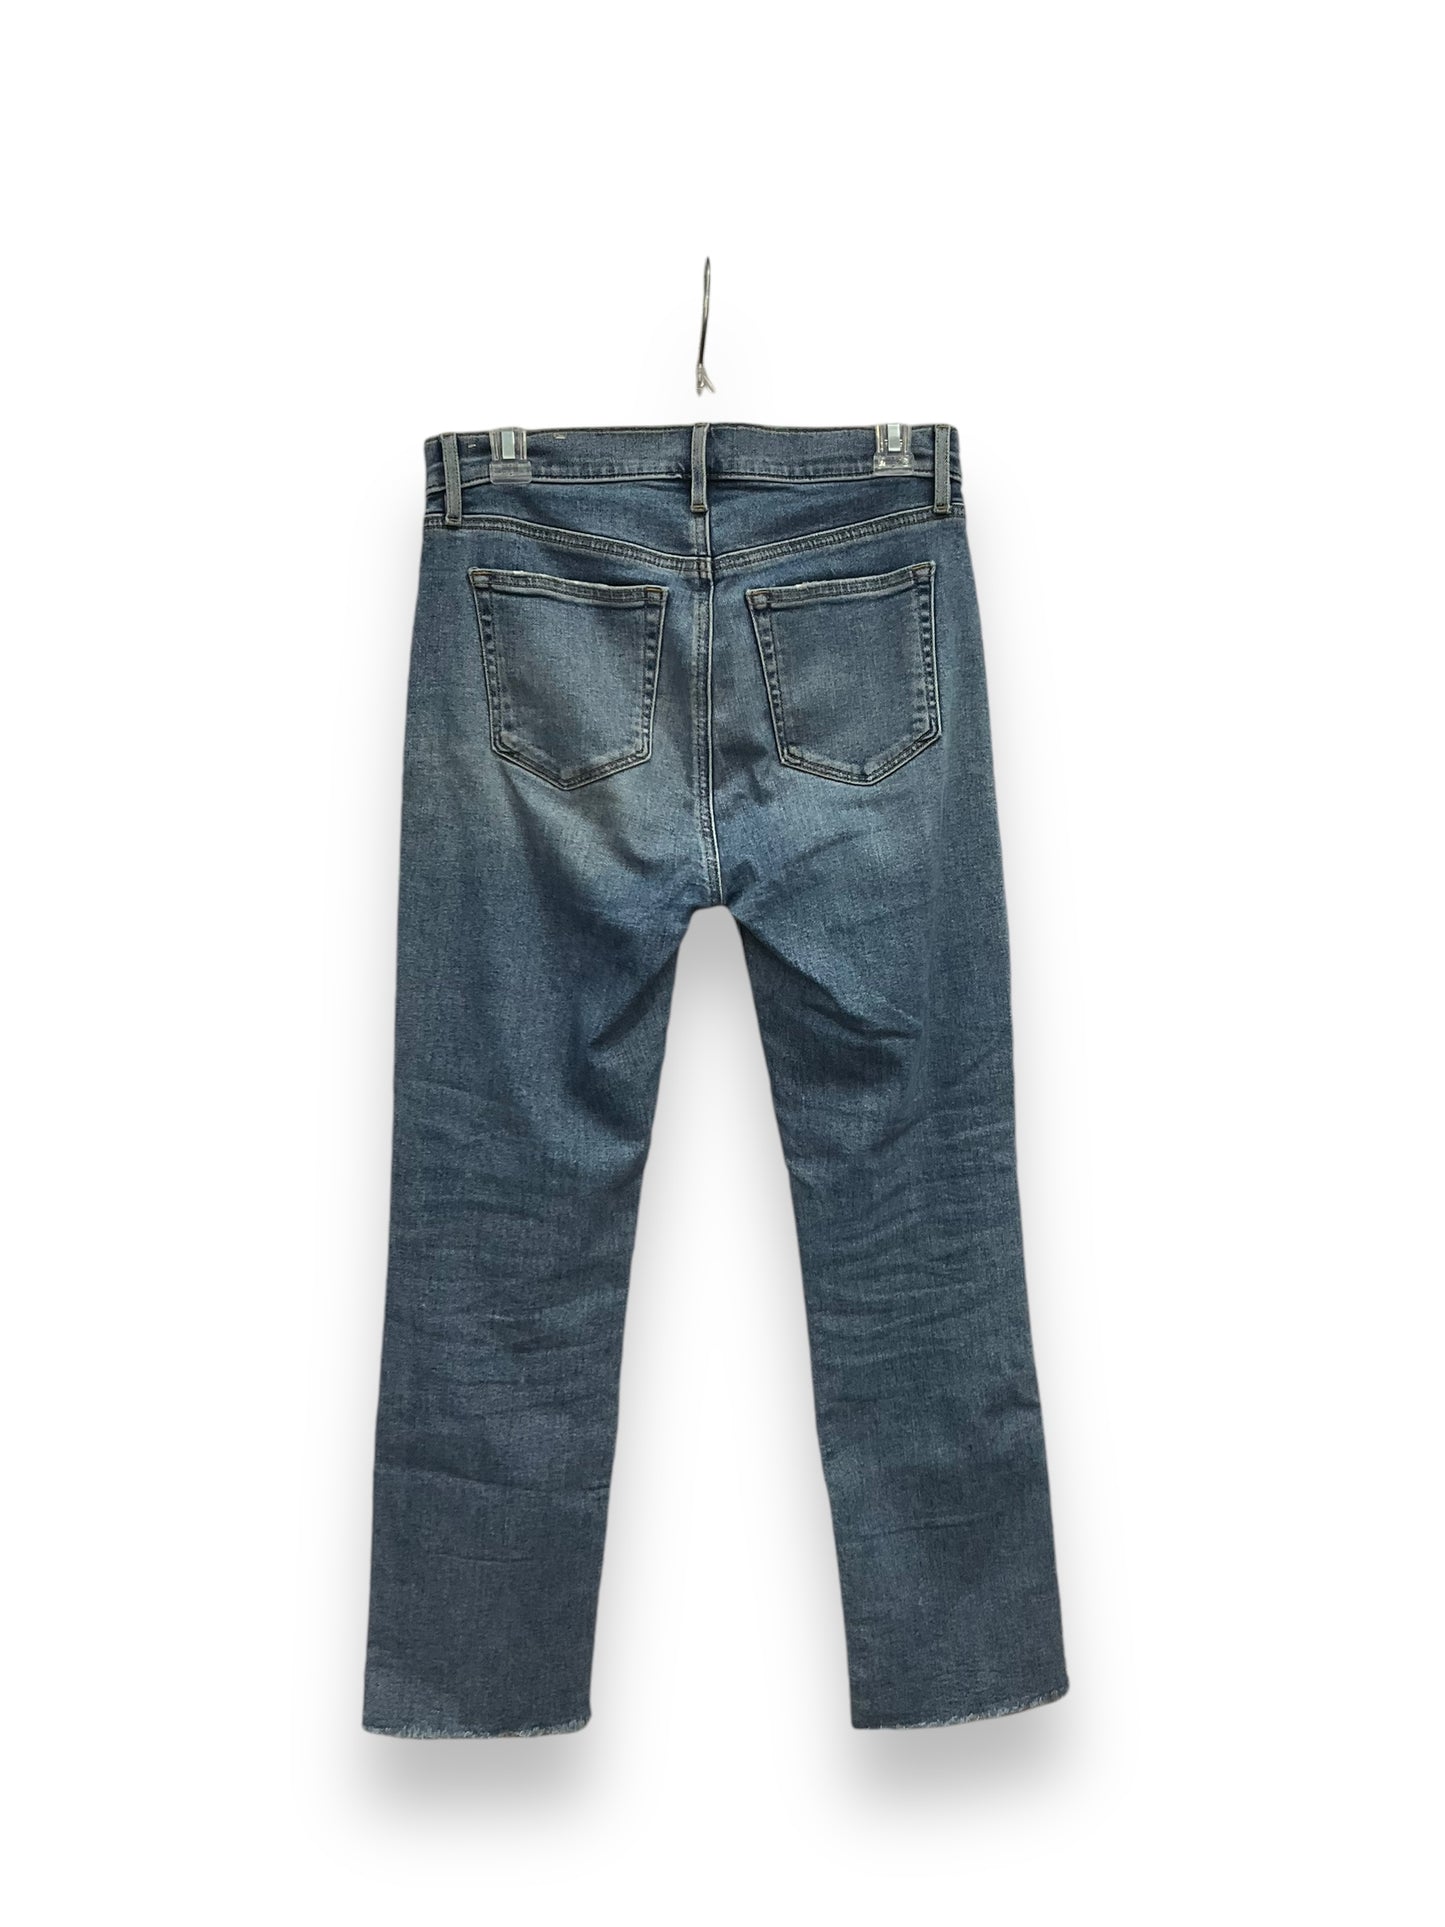 Jeans Straight By Loft  Size: 2